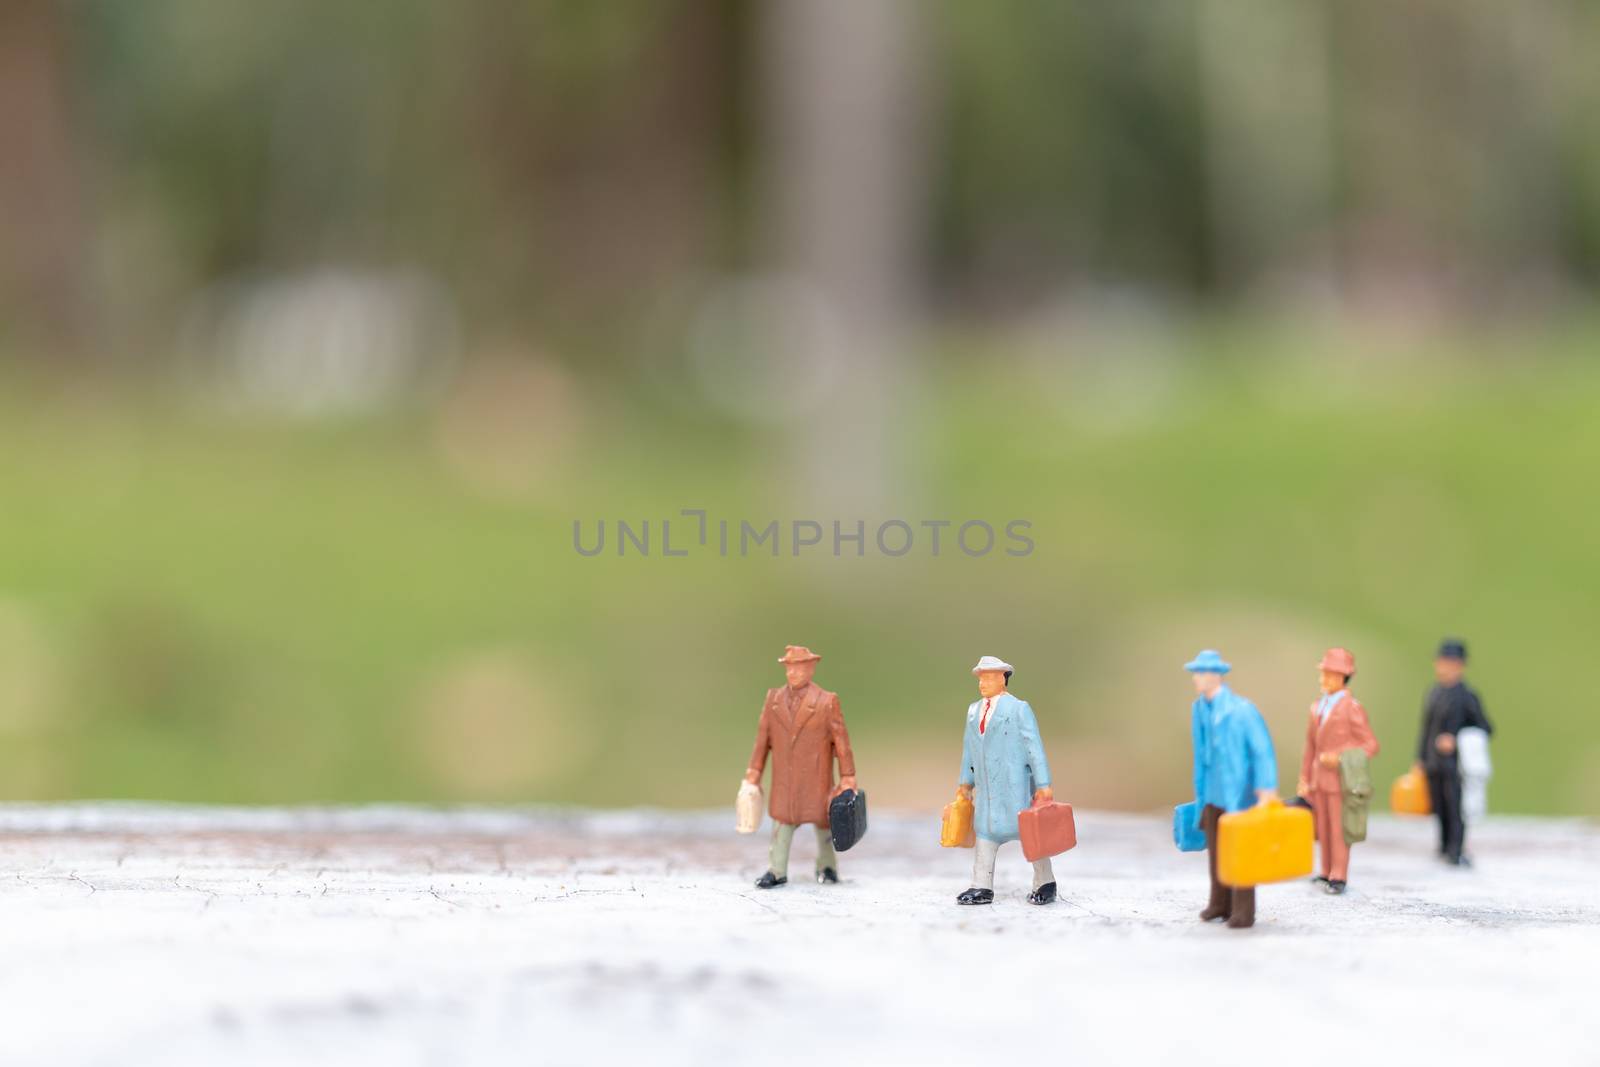 Miniature people : Traveler walking on street  , Travel and Adventure concepts.